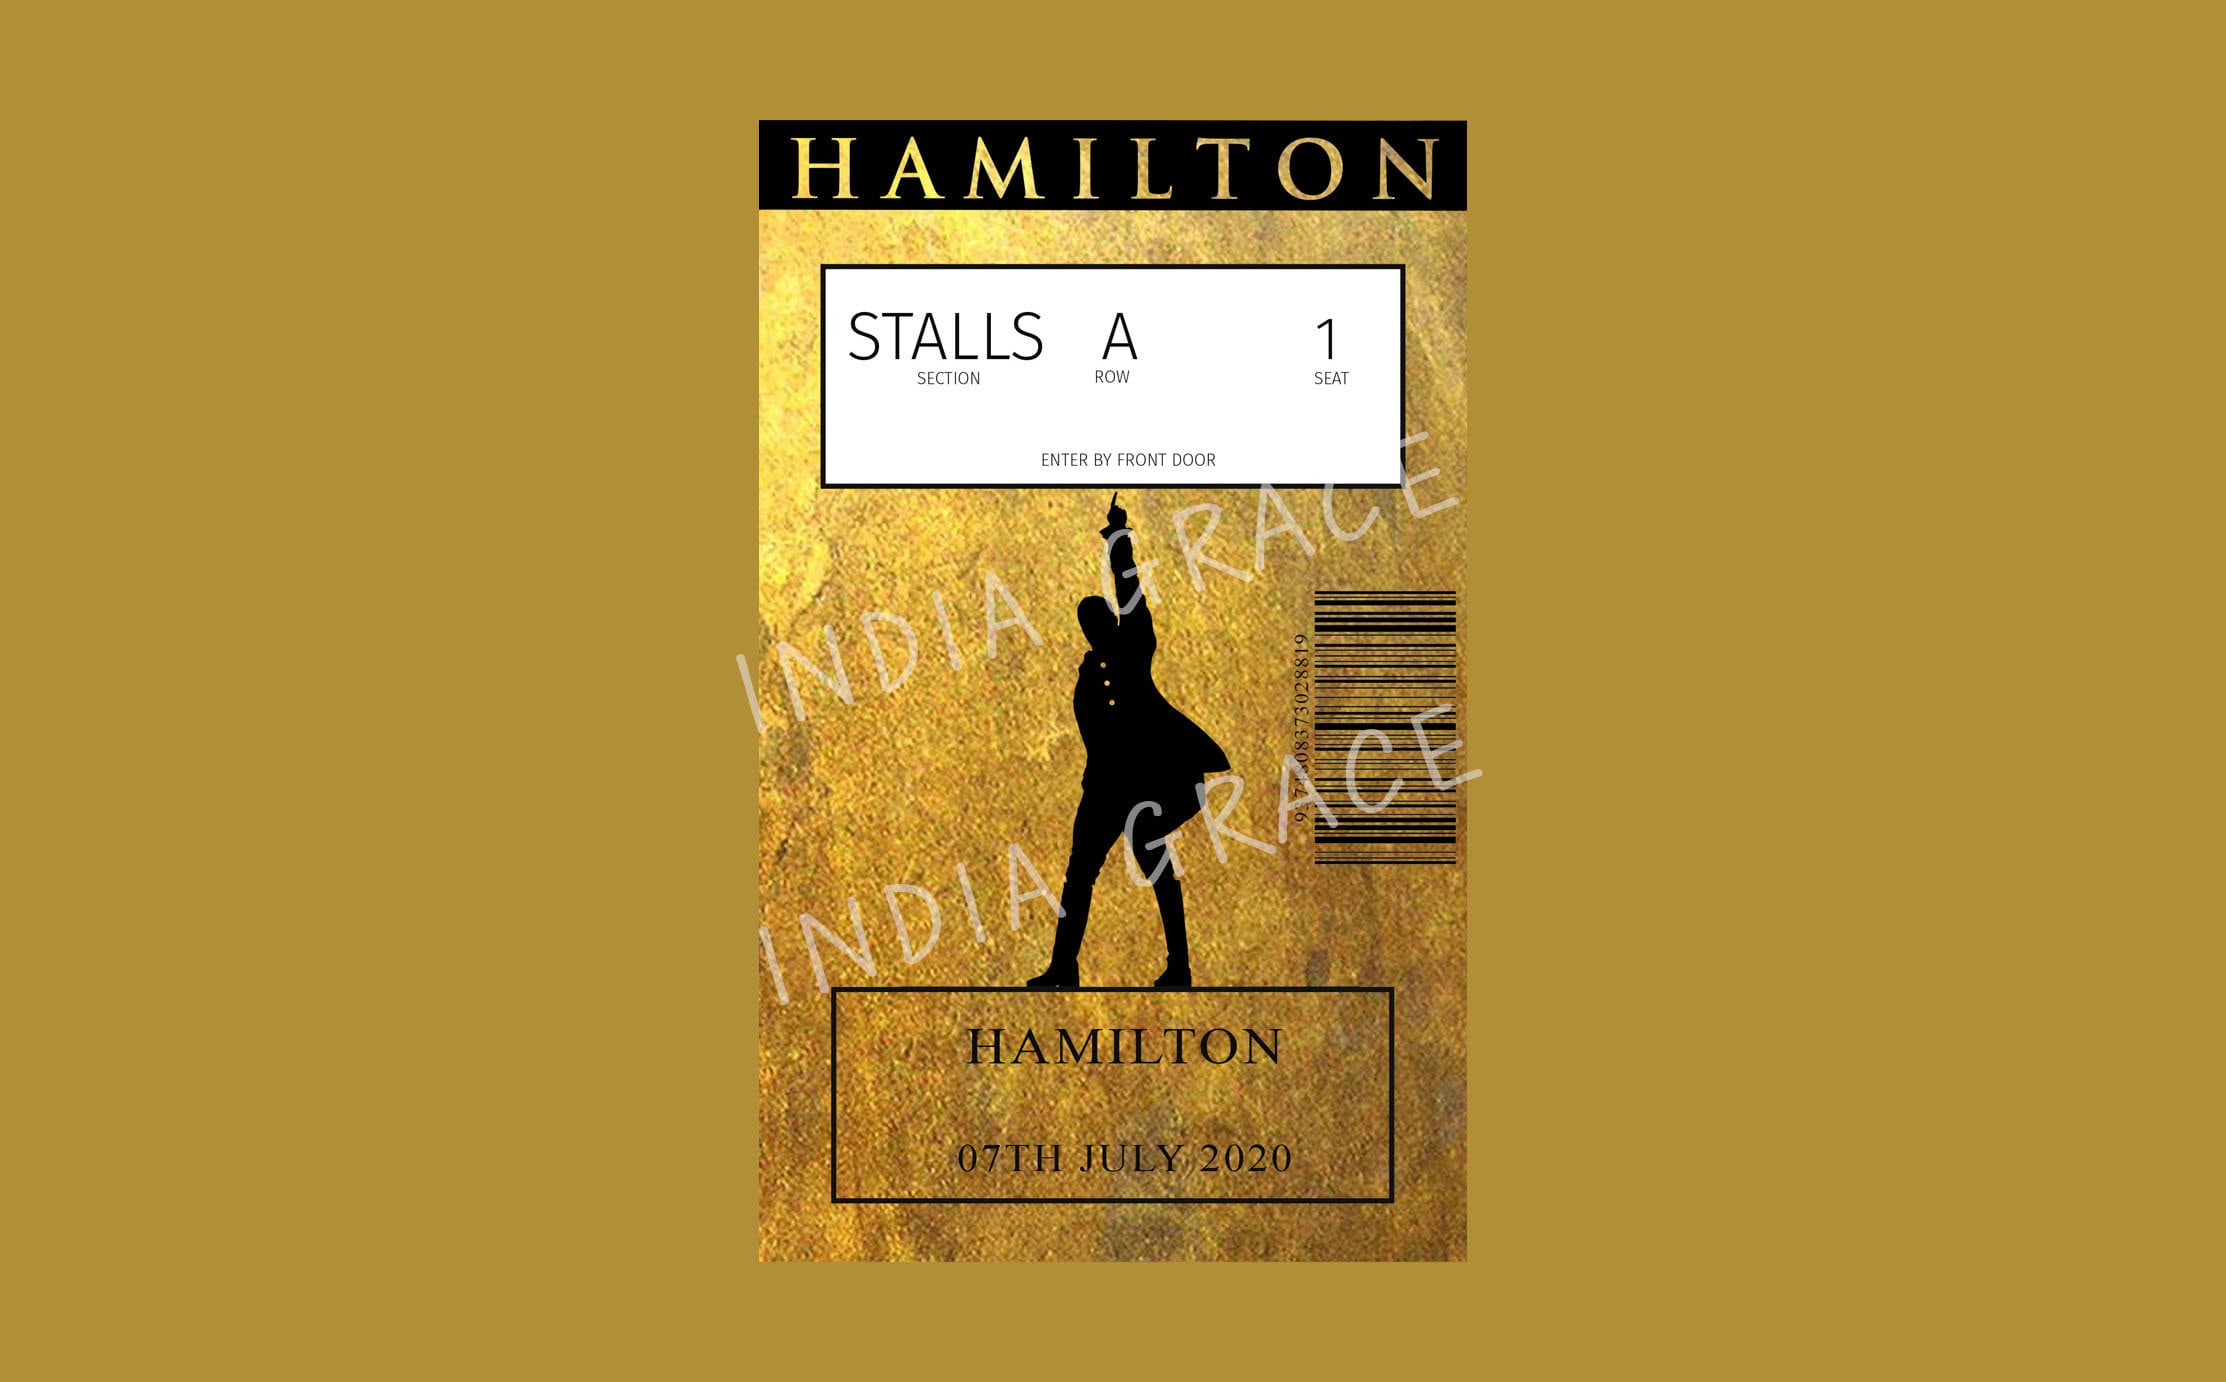 broadway-ticket-template-tutoreorg-master-of-documents-are-there-still-ways-to-get-hamilton